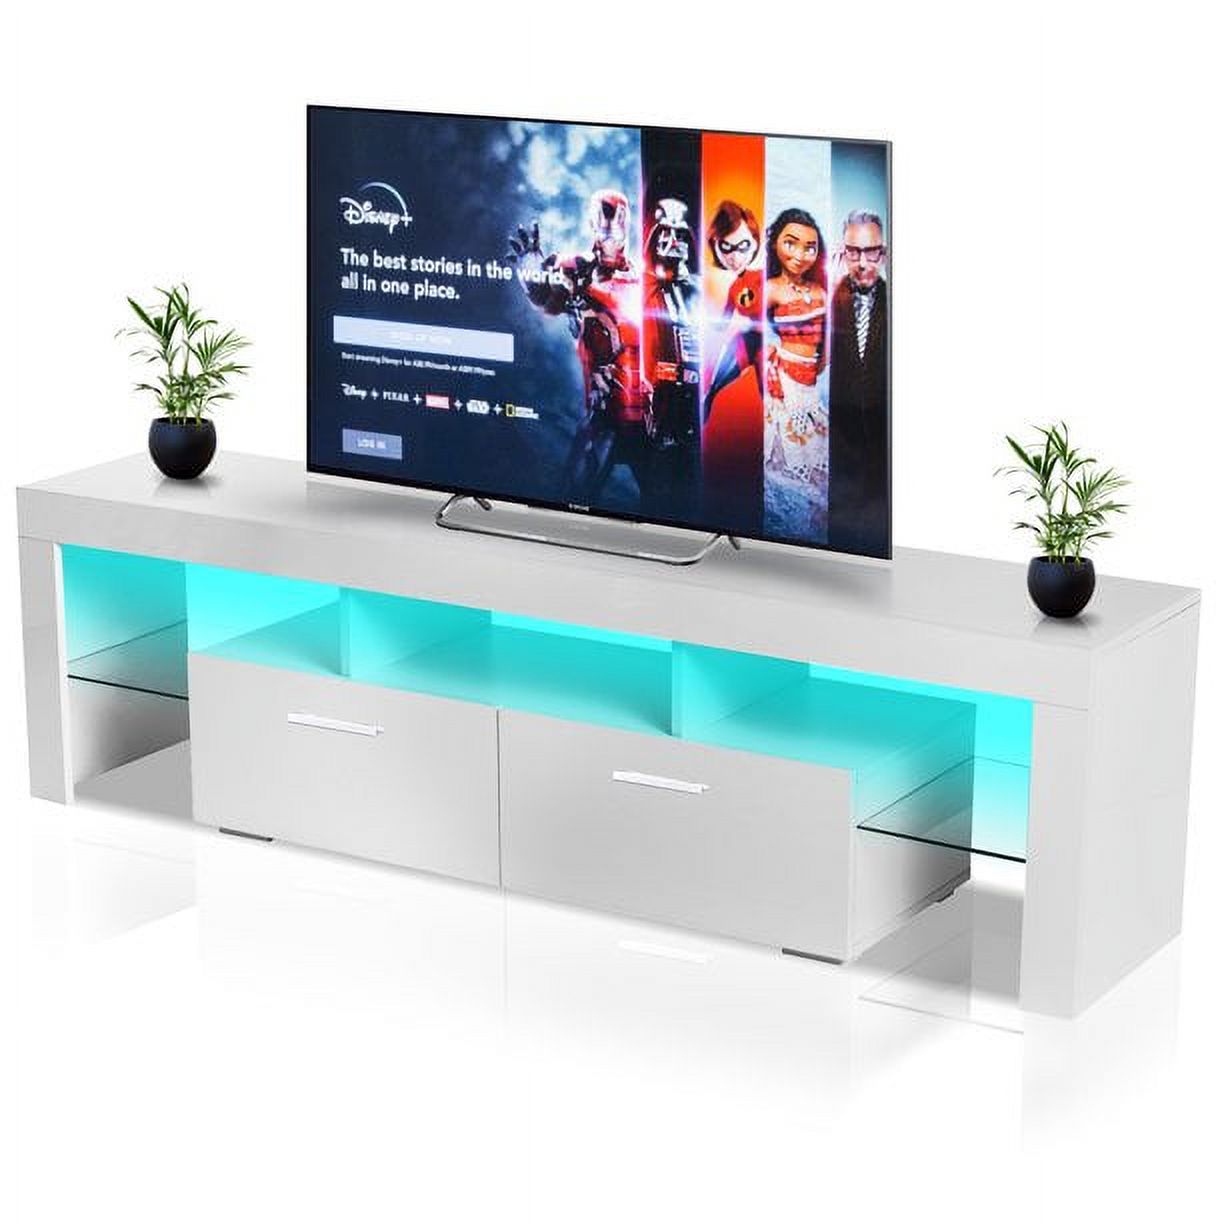 Modern TV Stands with LED Lights, High Gloss TV Entertainment Center for 70 Inch TV with 2 Flip Down Drawers and Open Shelves, Modern Console Media Table Storage Desk for Up to 70 Inch TV, White - image 1 of 9